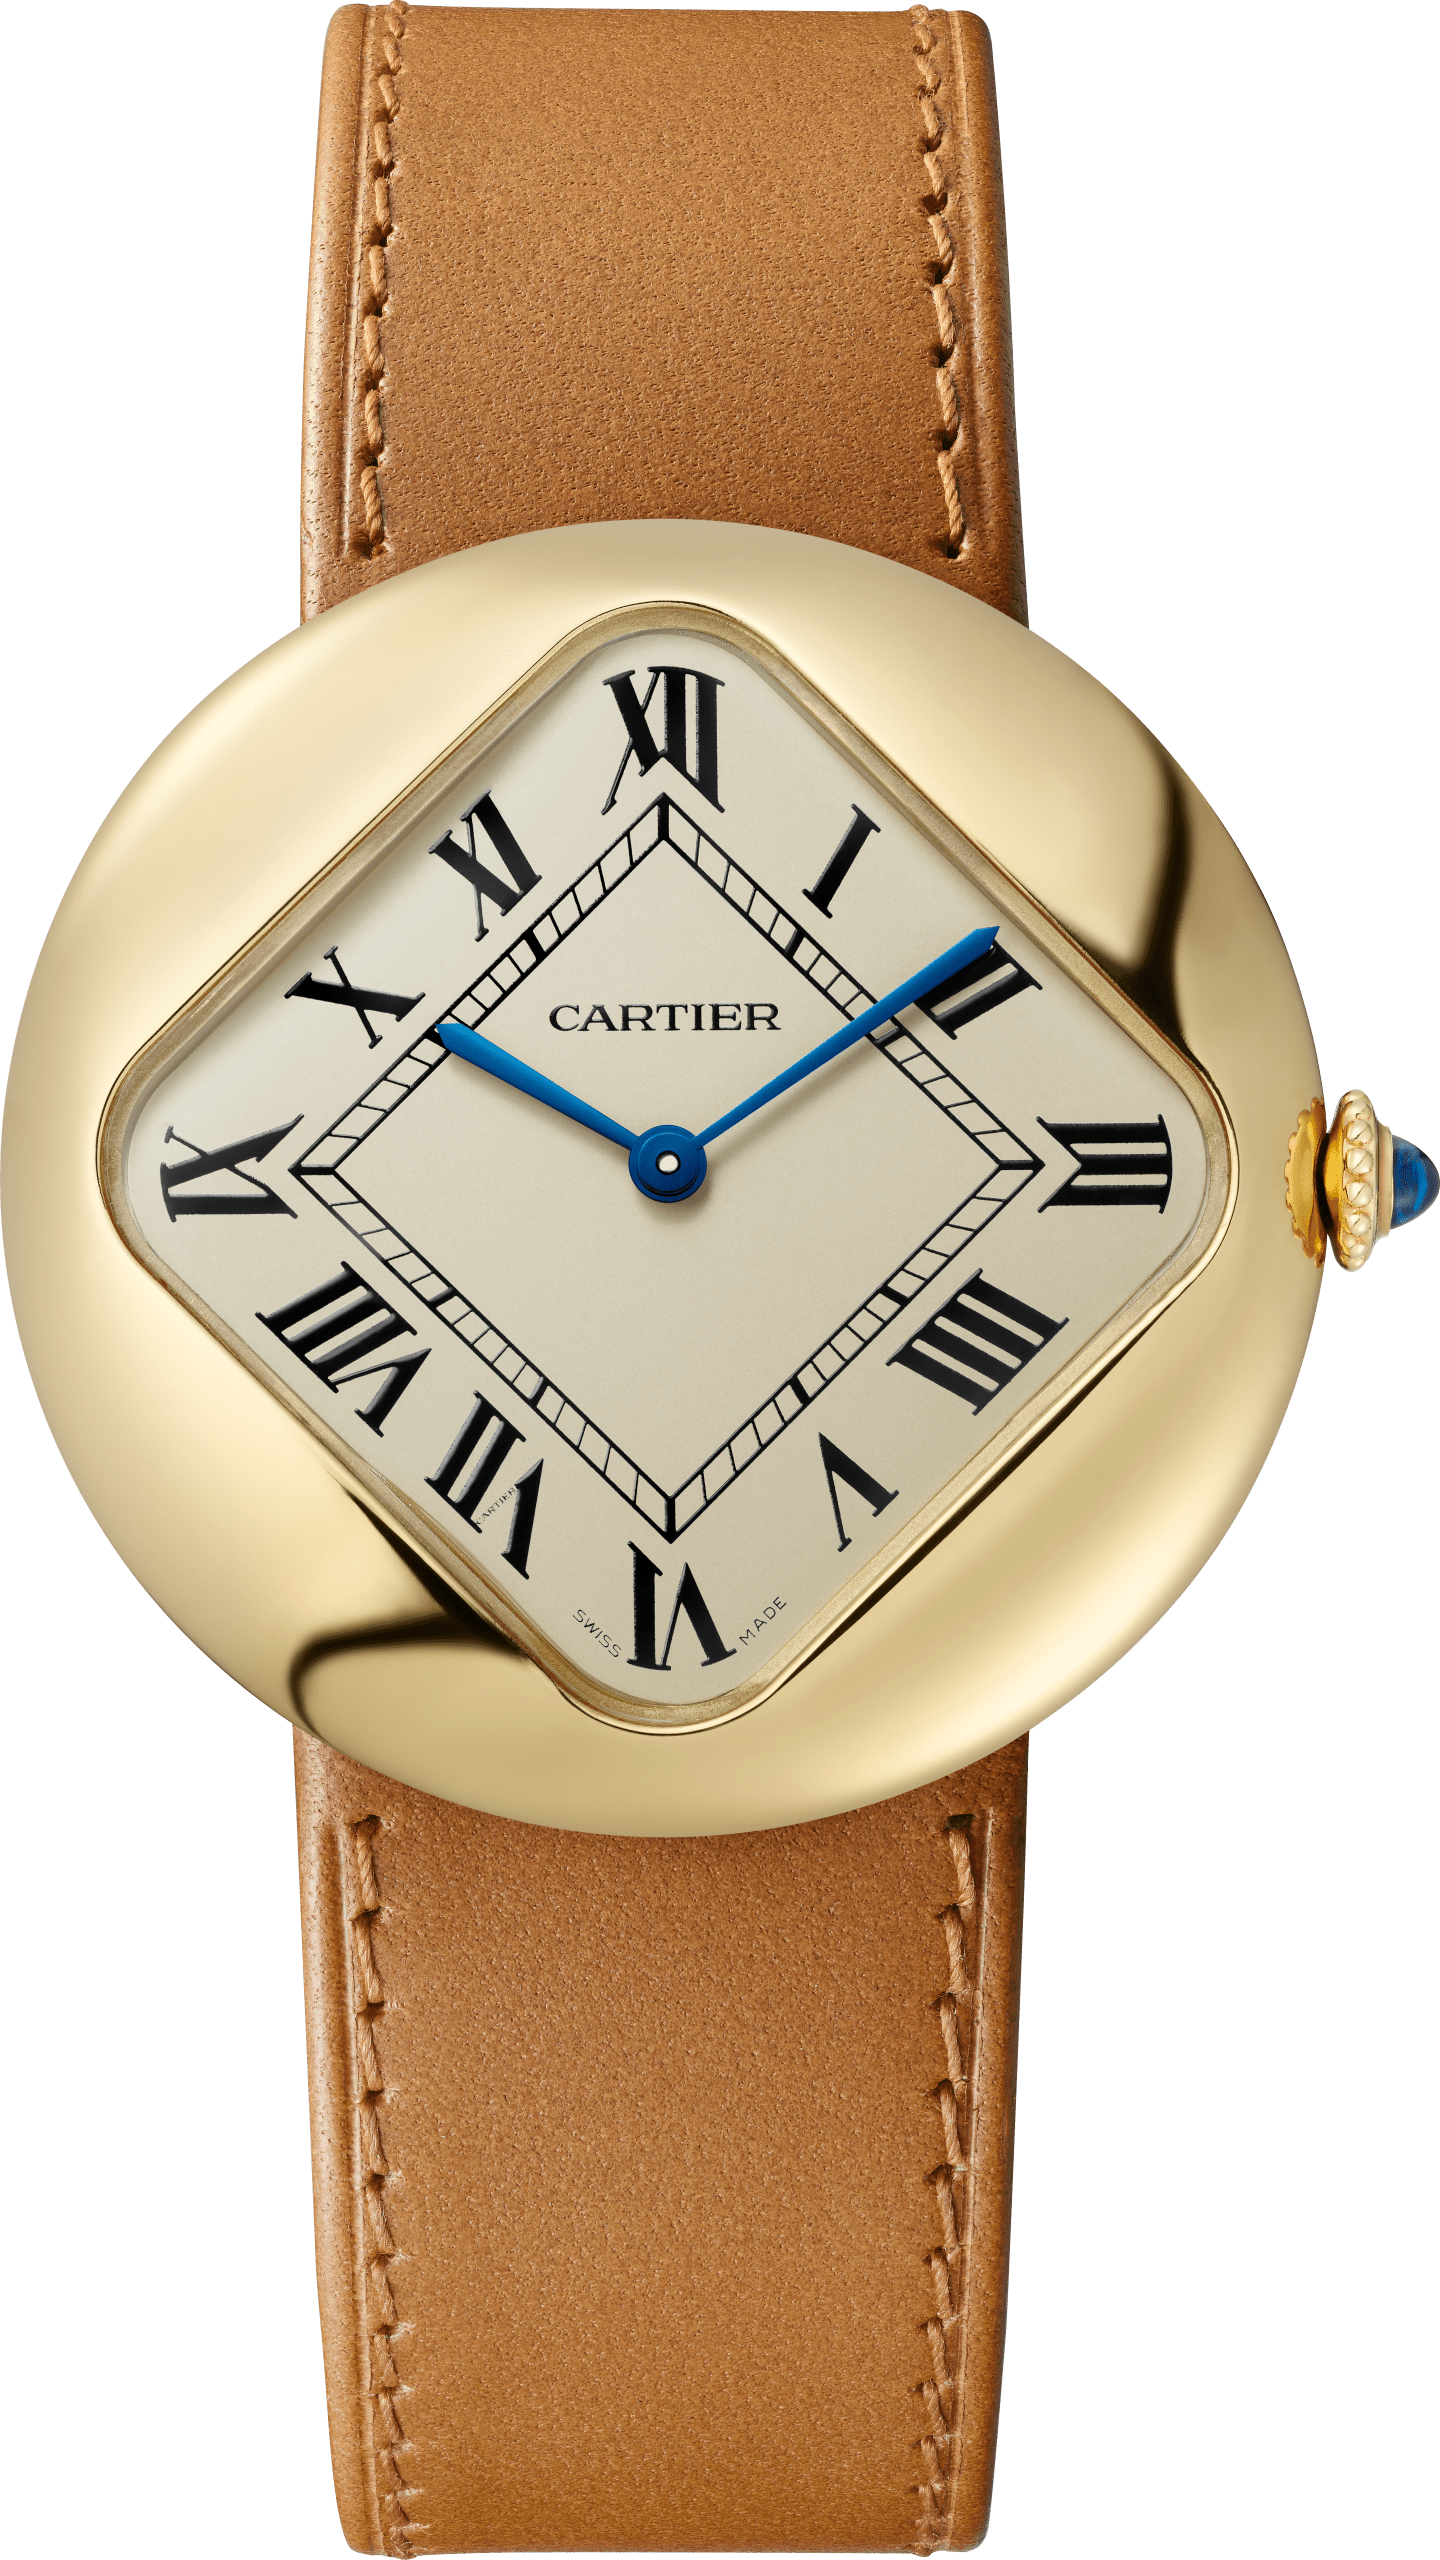 Taking a Second Look: The Cartier Pebble